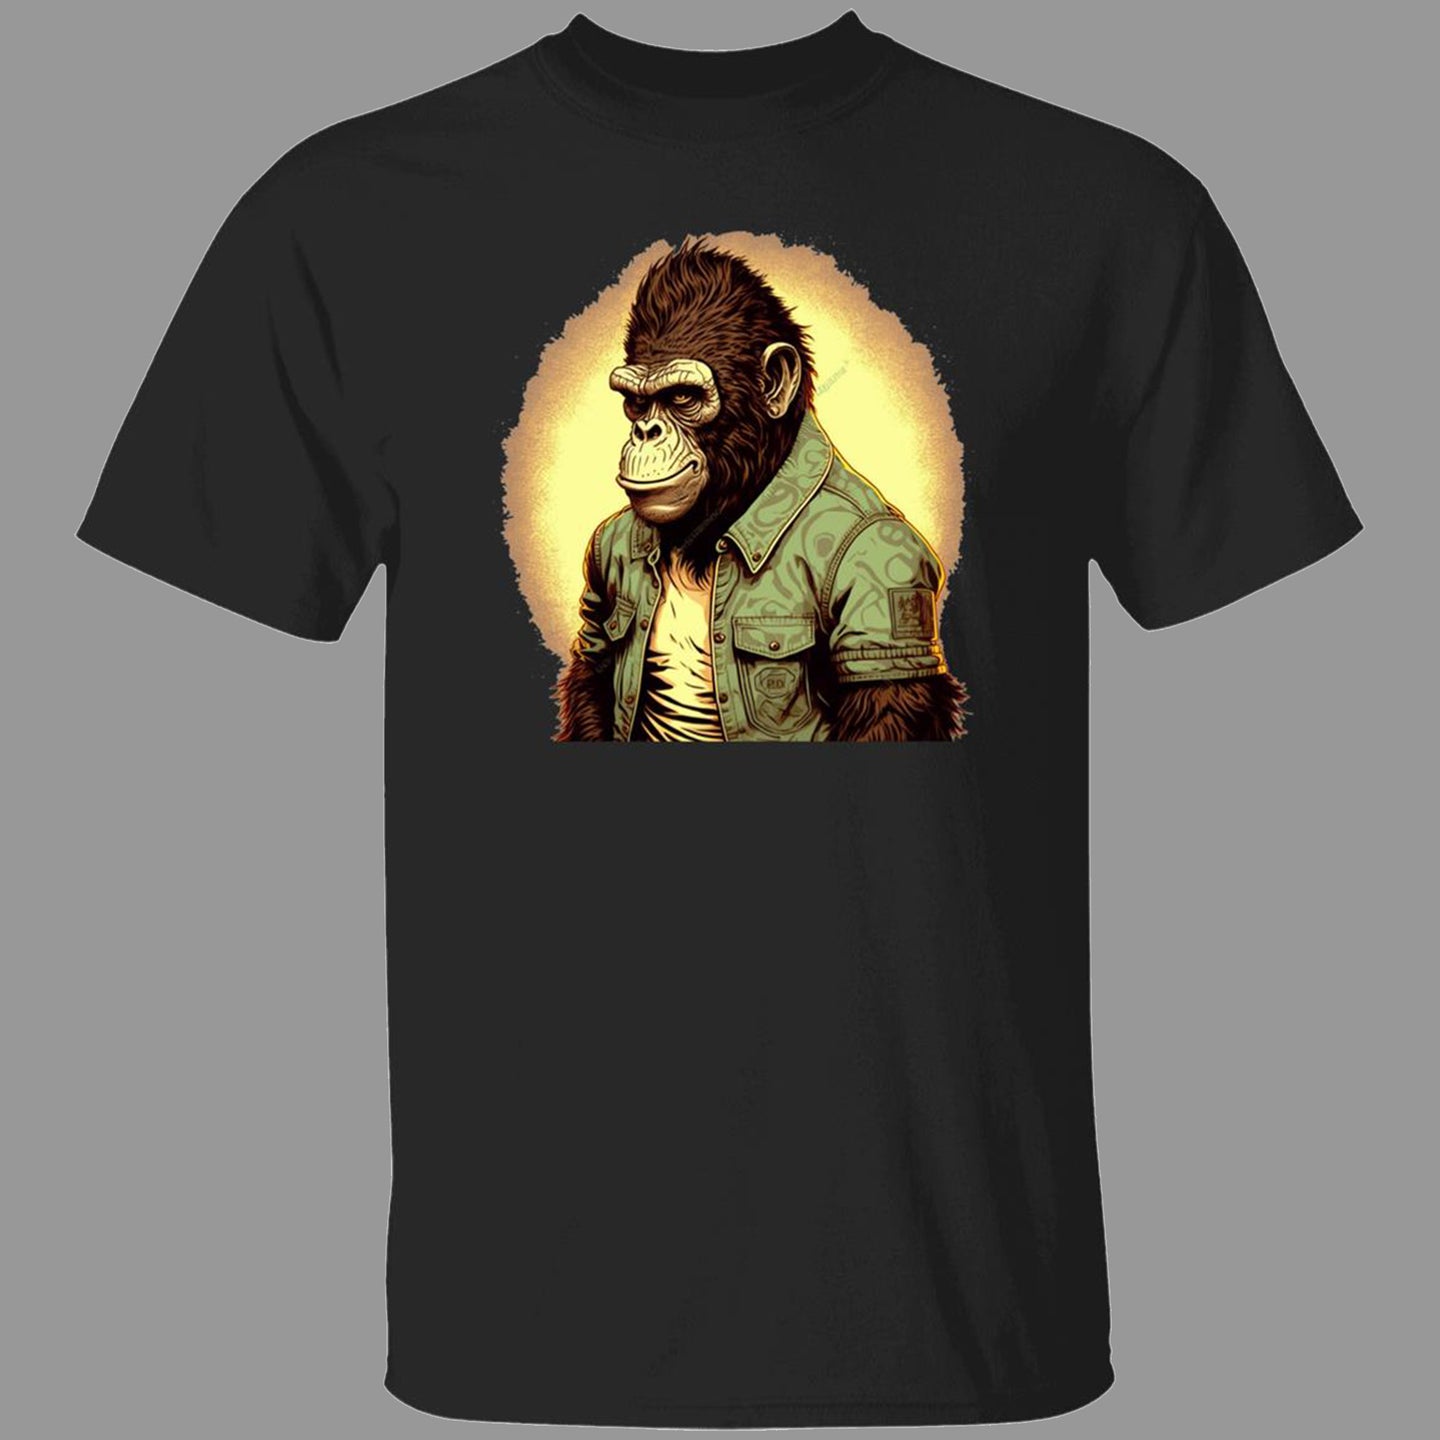 Black Tee with Gorilla wearing green button-up shirt